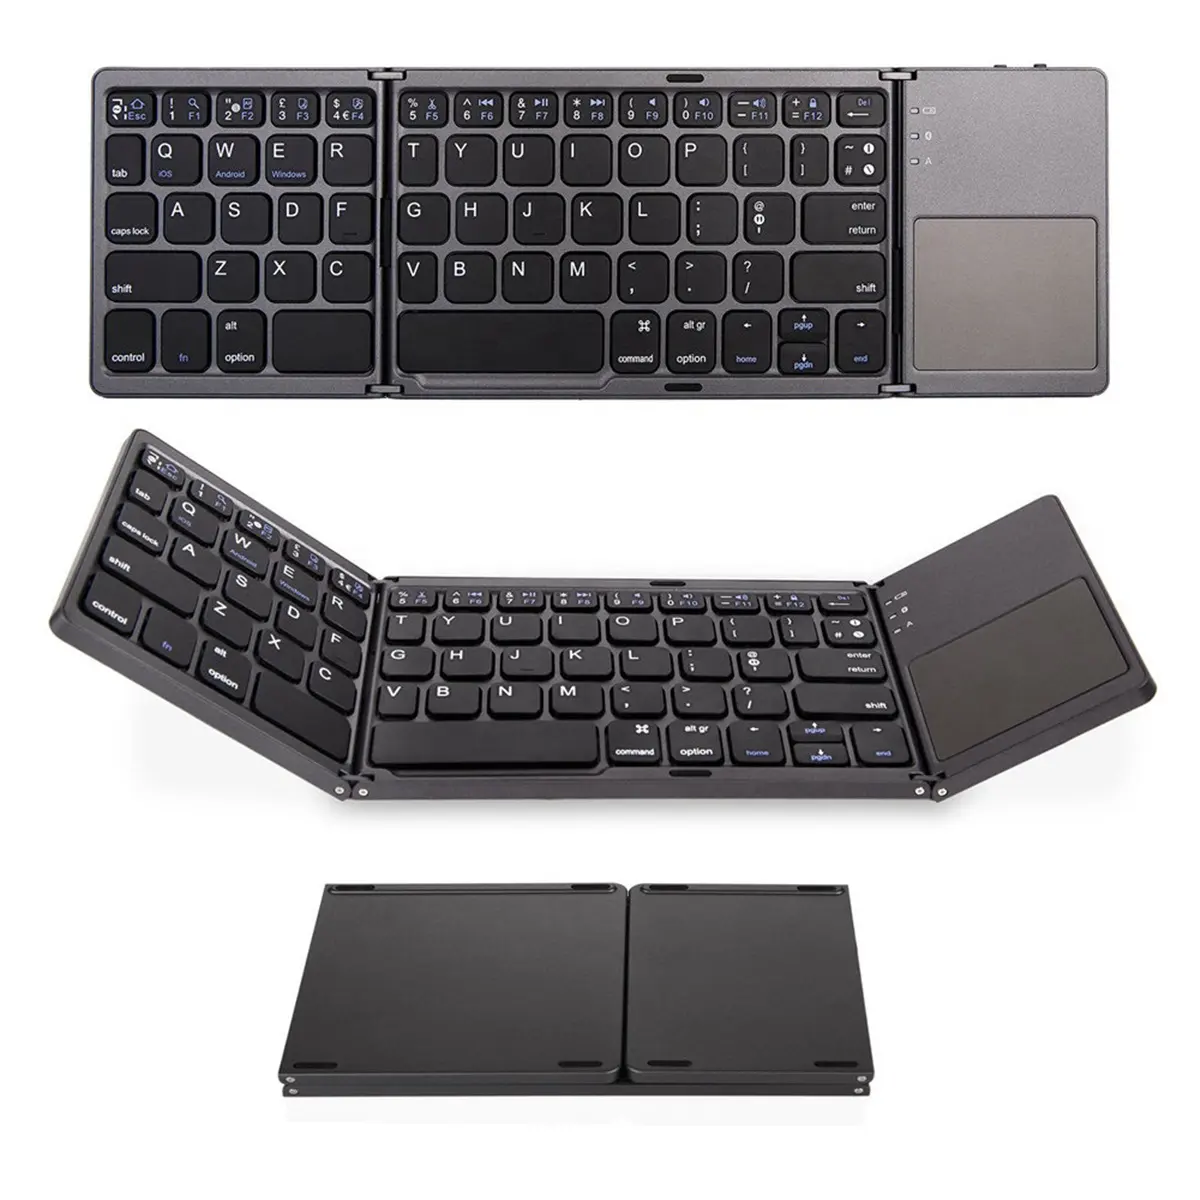 Portable Mini 2.4G BT Wireless Keyboard and Mouse Combo For Ipad Android Tablet Rechargeable Keypad with Touchpad B033